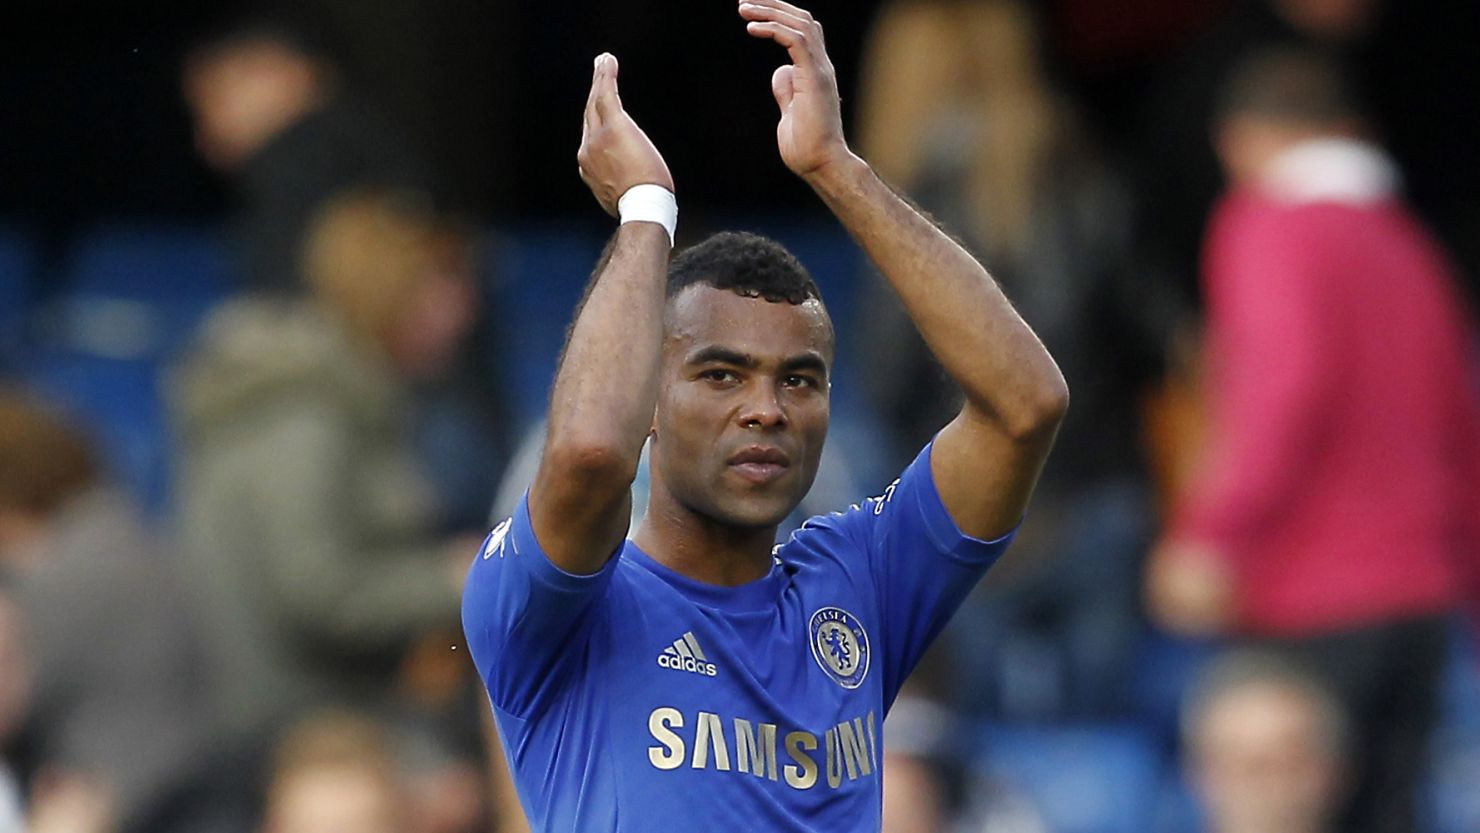 Chelsea defender Ashley Cole has been charged with misconduct by the English Football Association